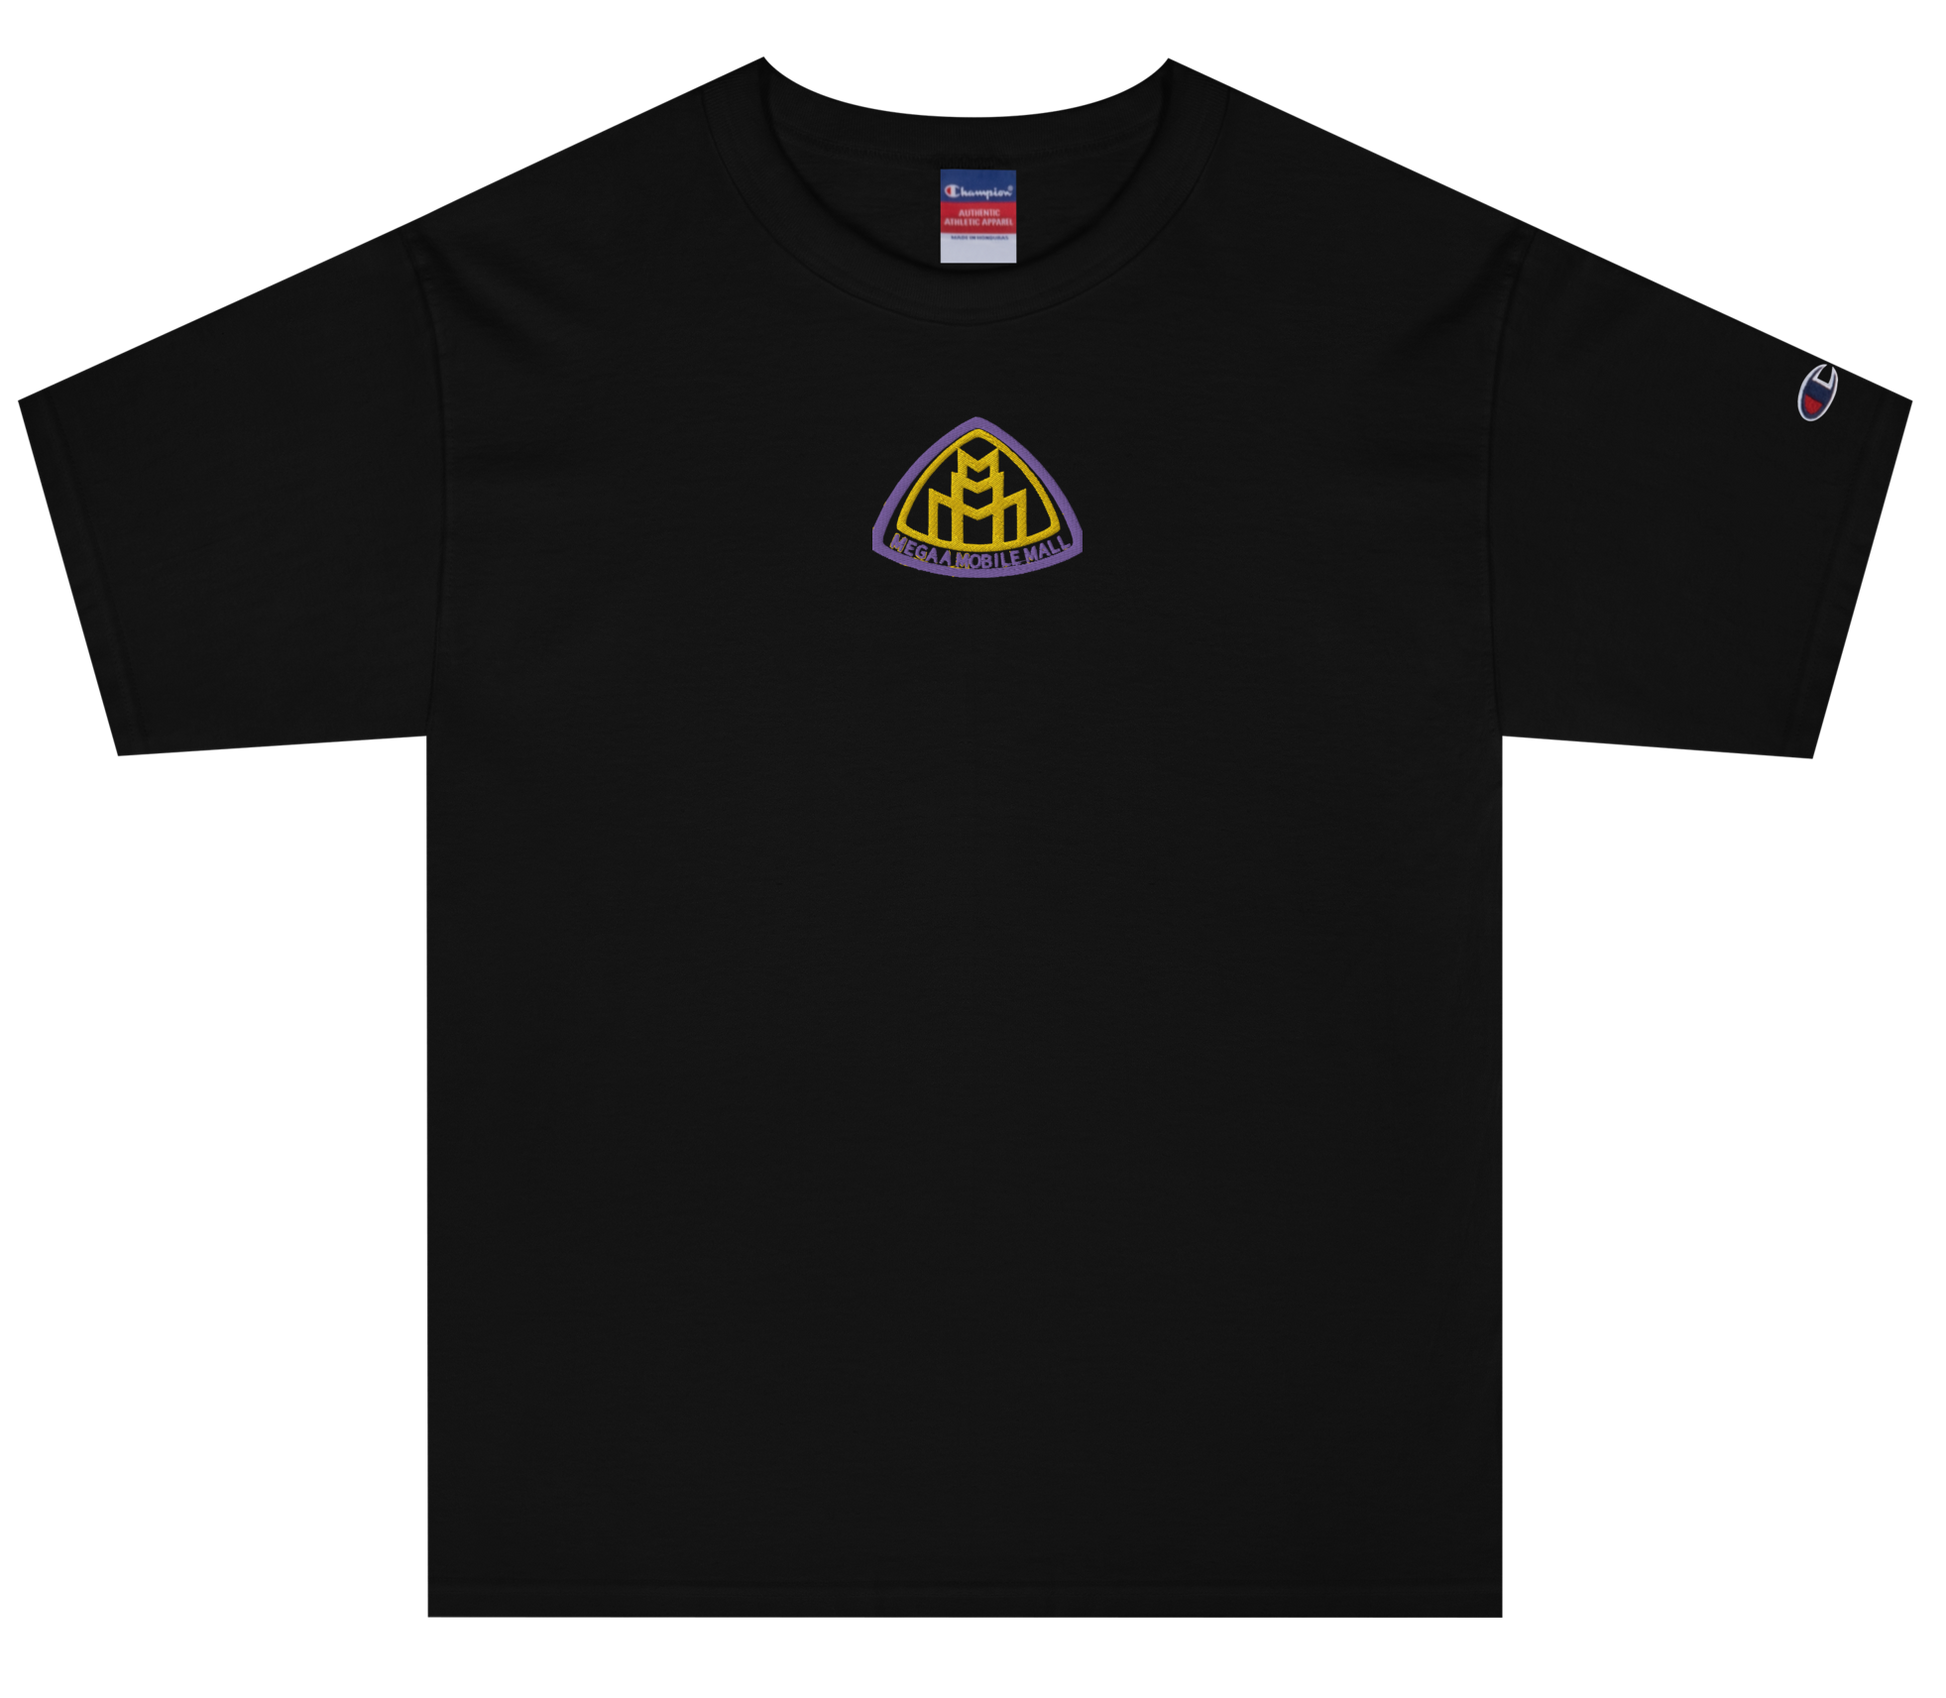 megaamobilemall logo embroidery in black on black shirt. yellow & gold stitching champion brand shirt